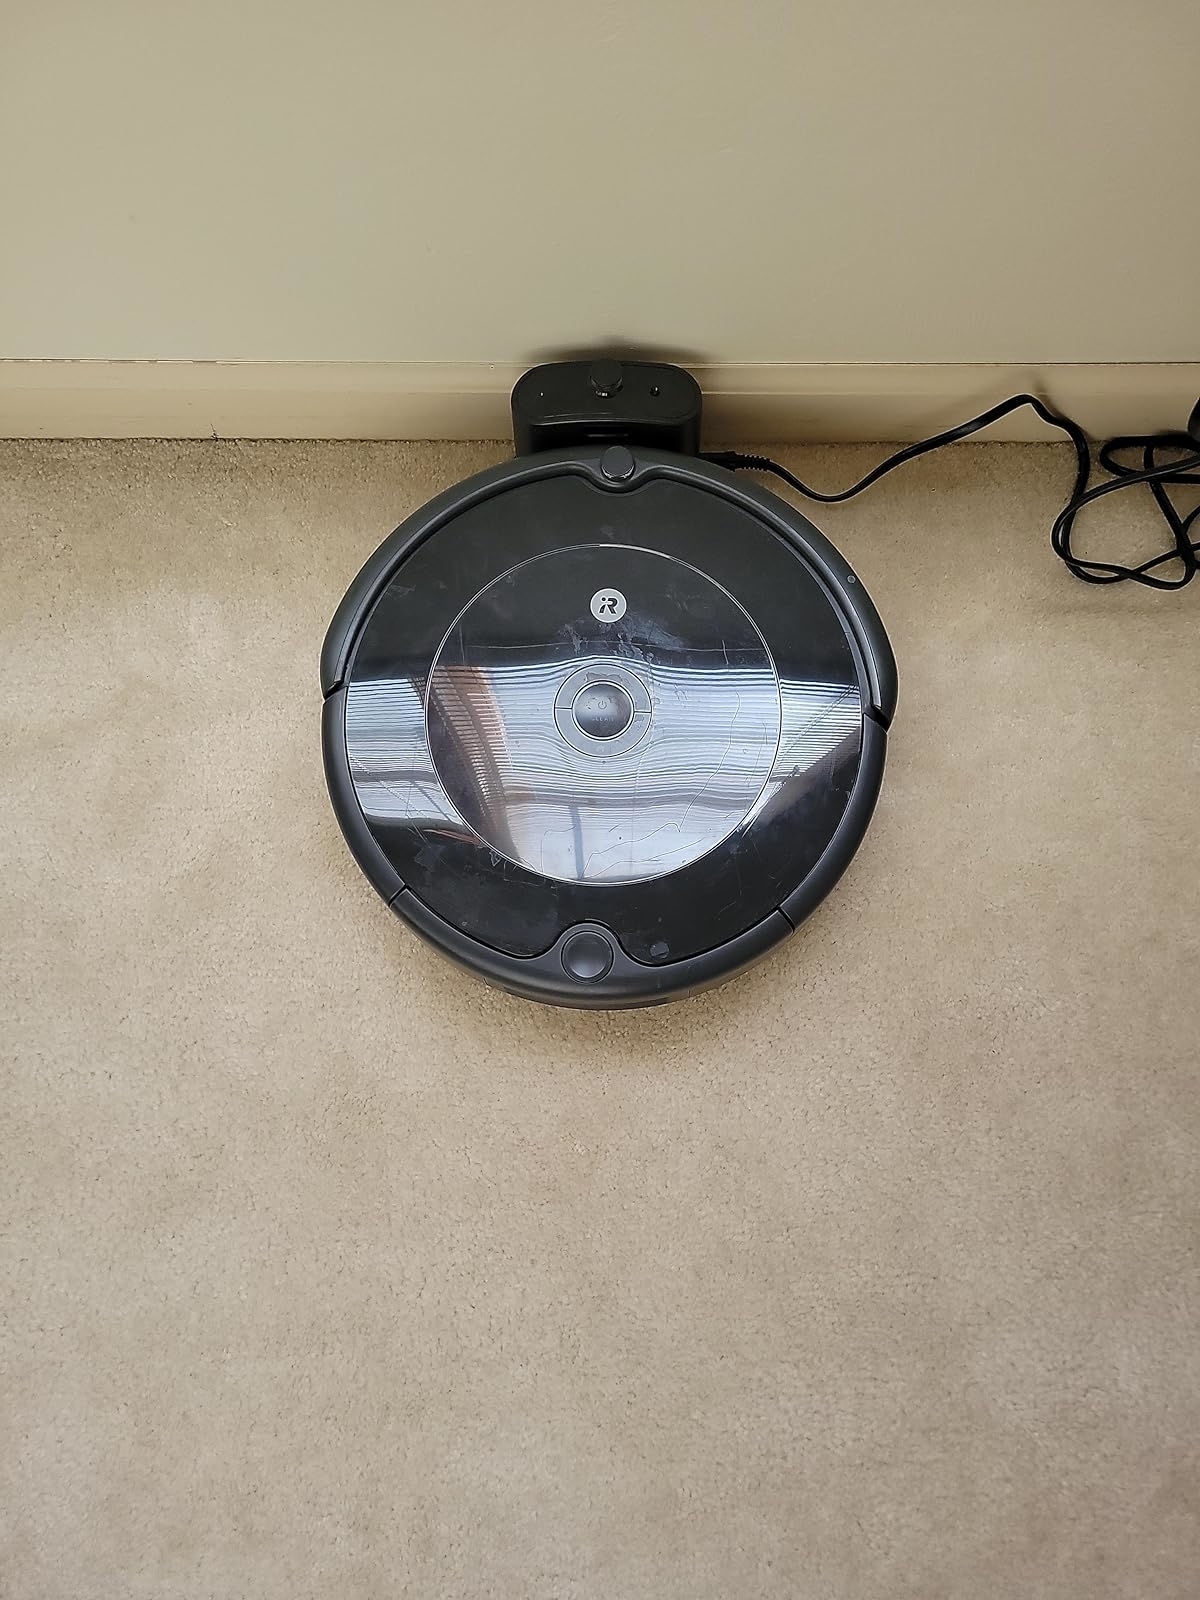 Reviewer image of the vacuum on a carpeted floor